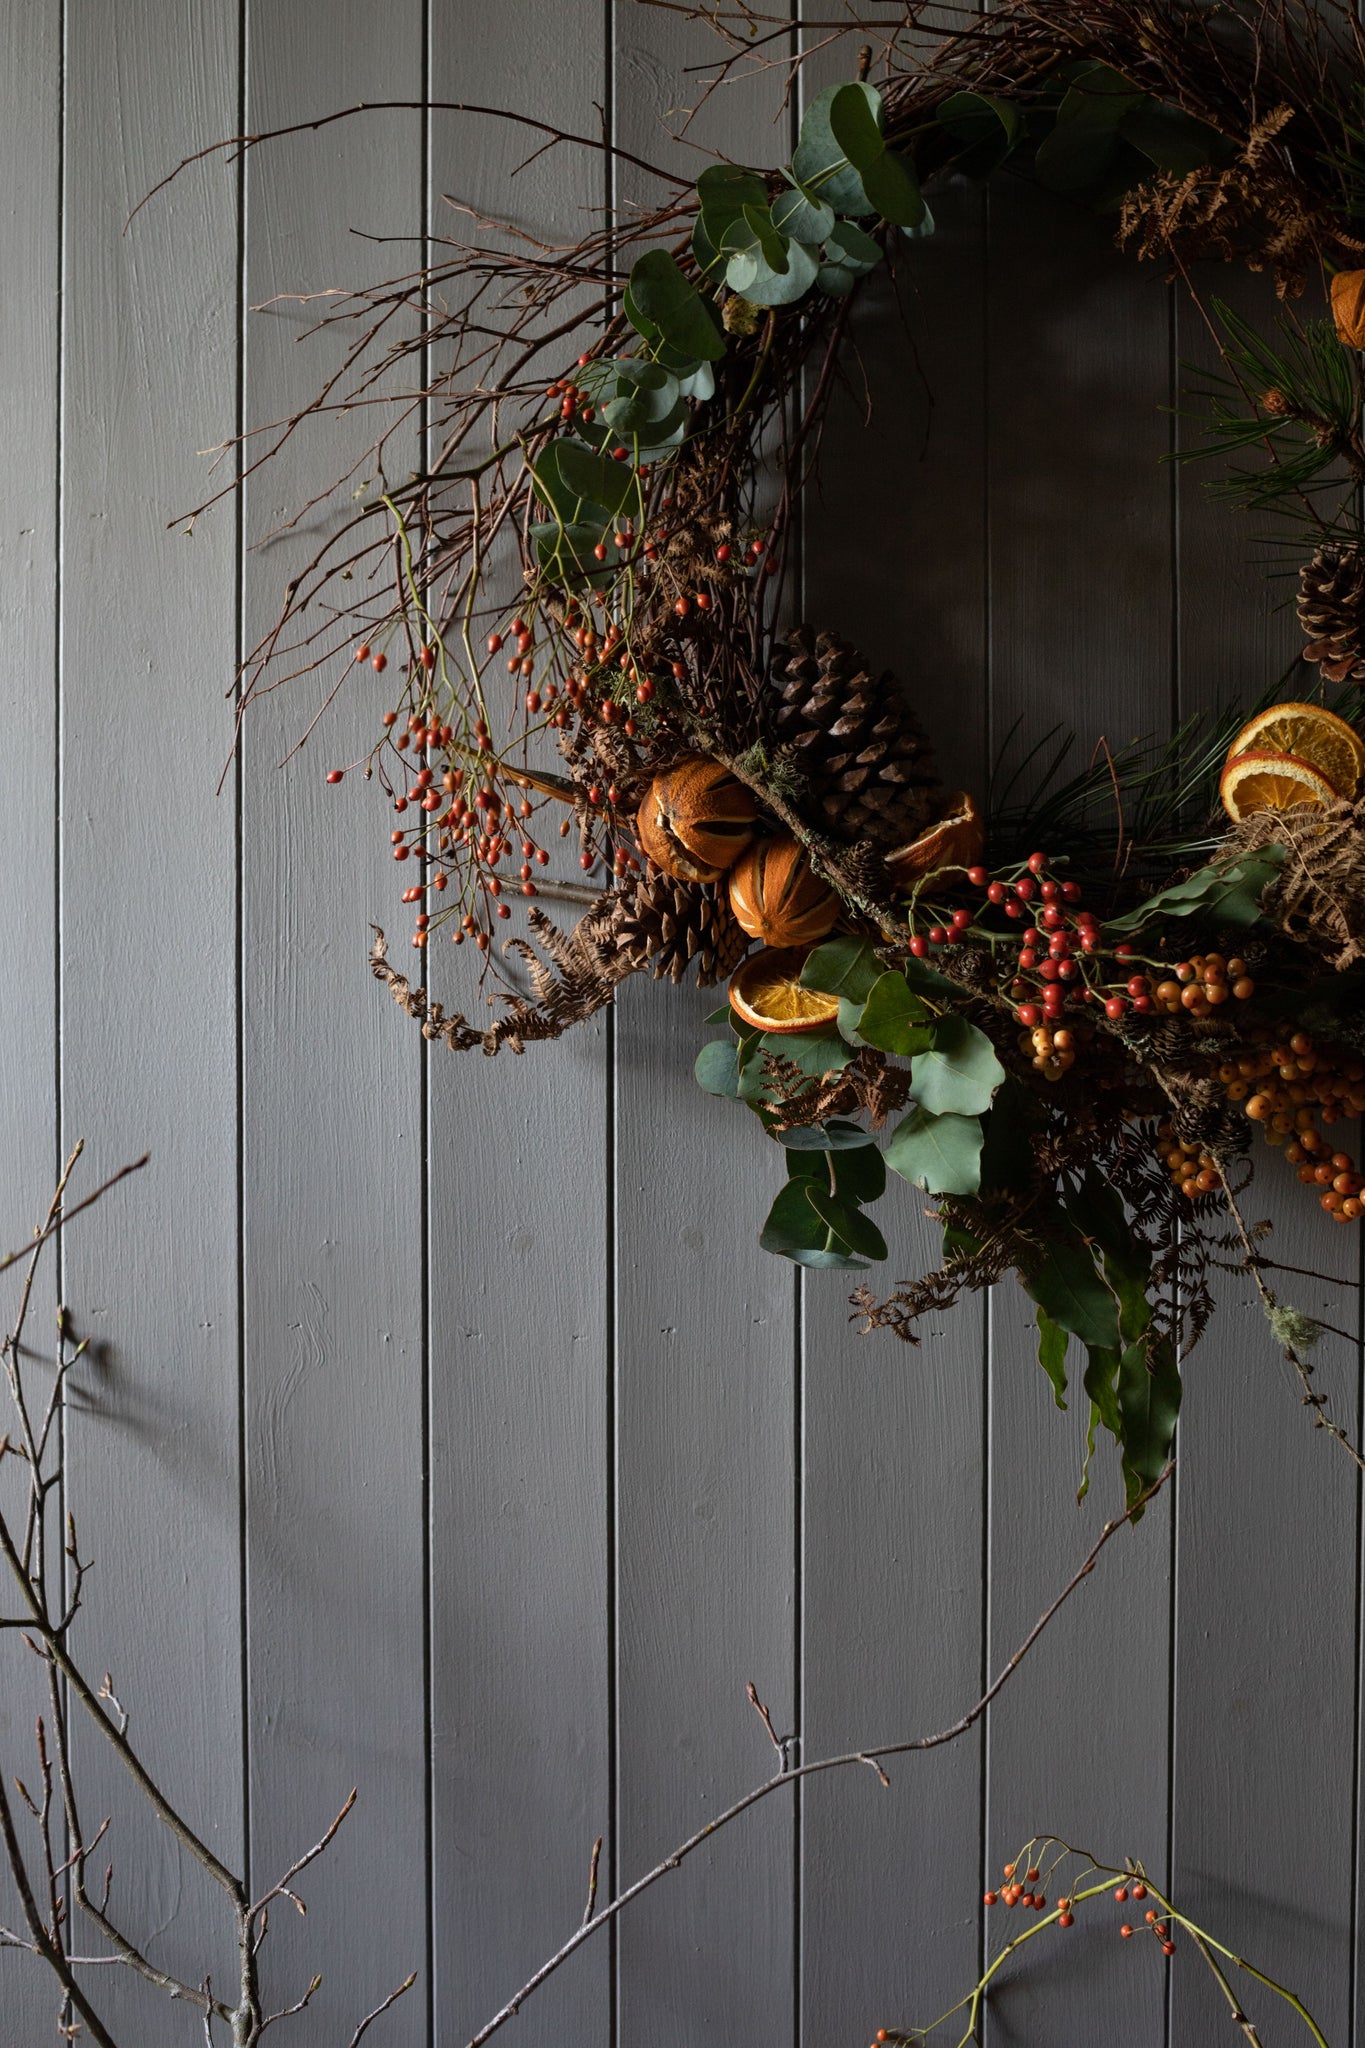 Notes on Christmas Wreaths